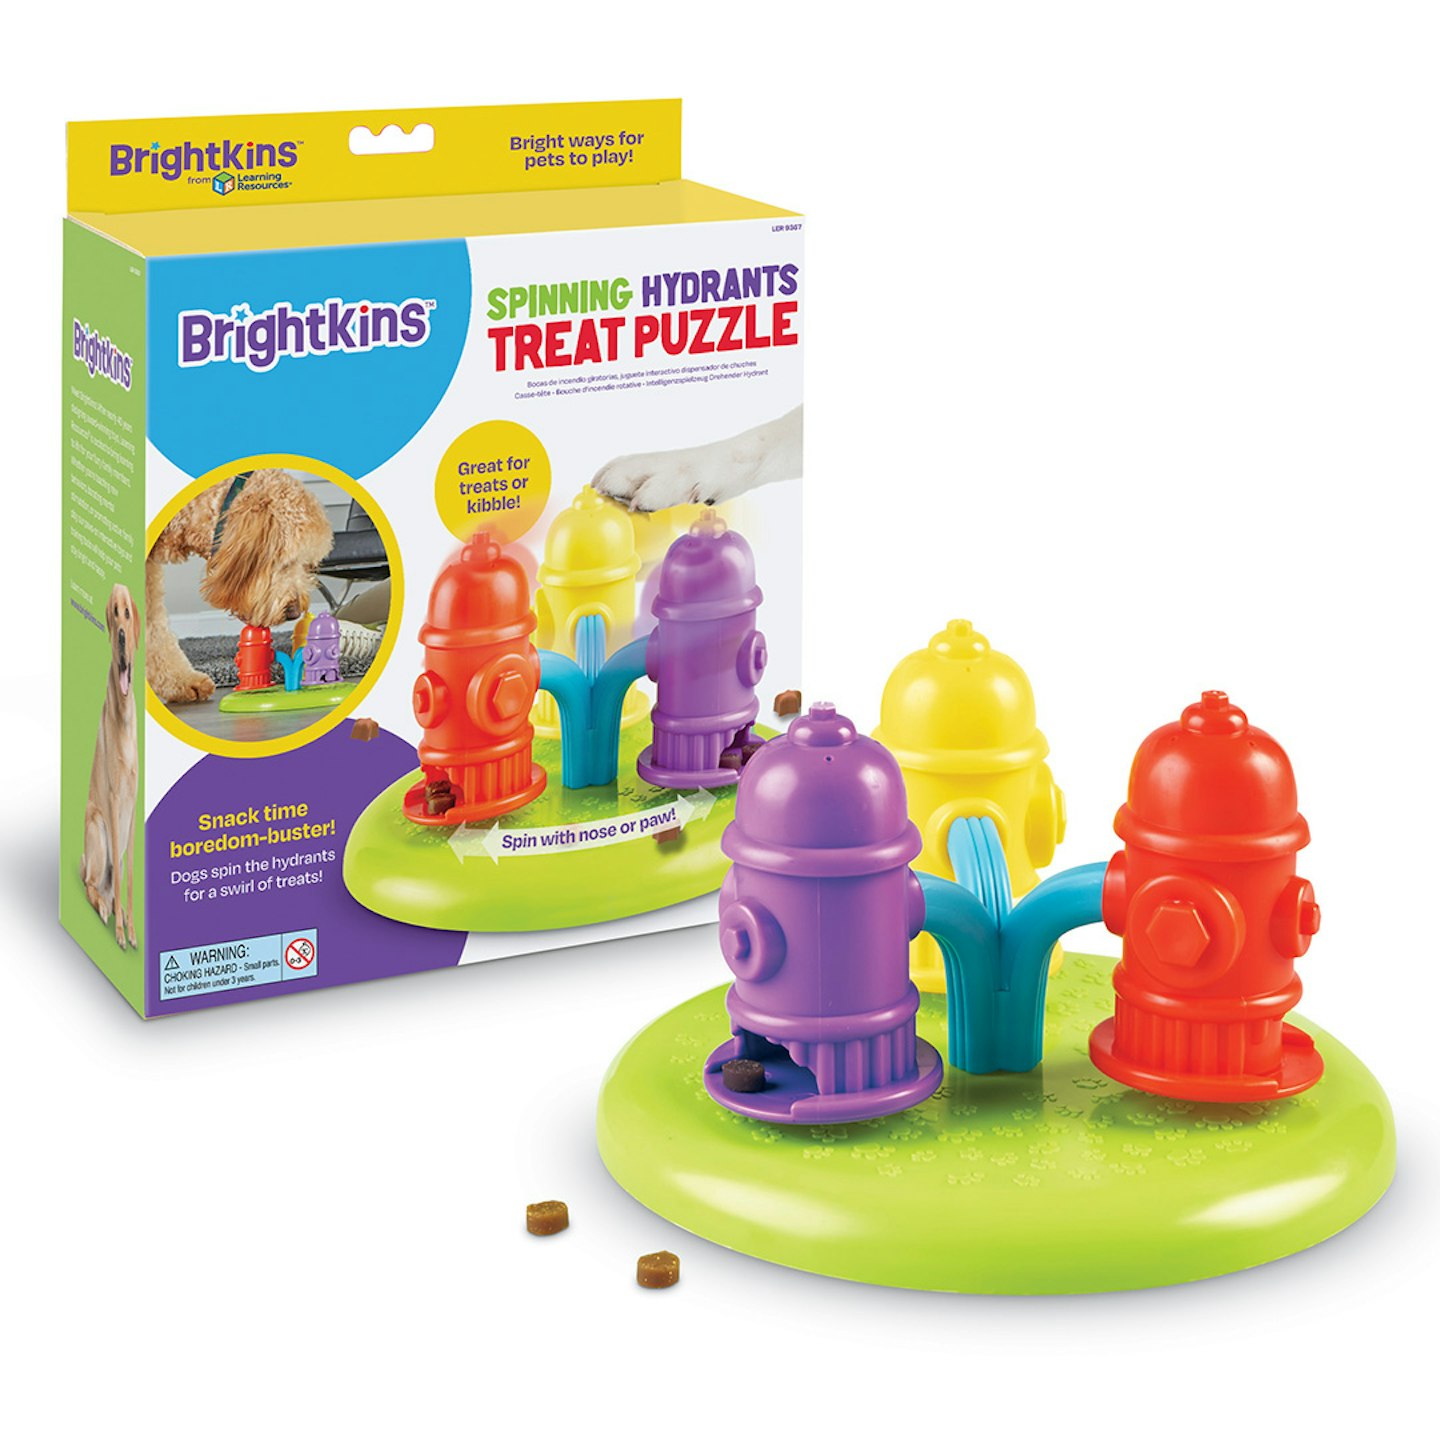 Brightkins™ Spinning Hydrants Treat Puzzle